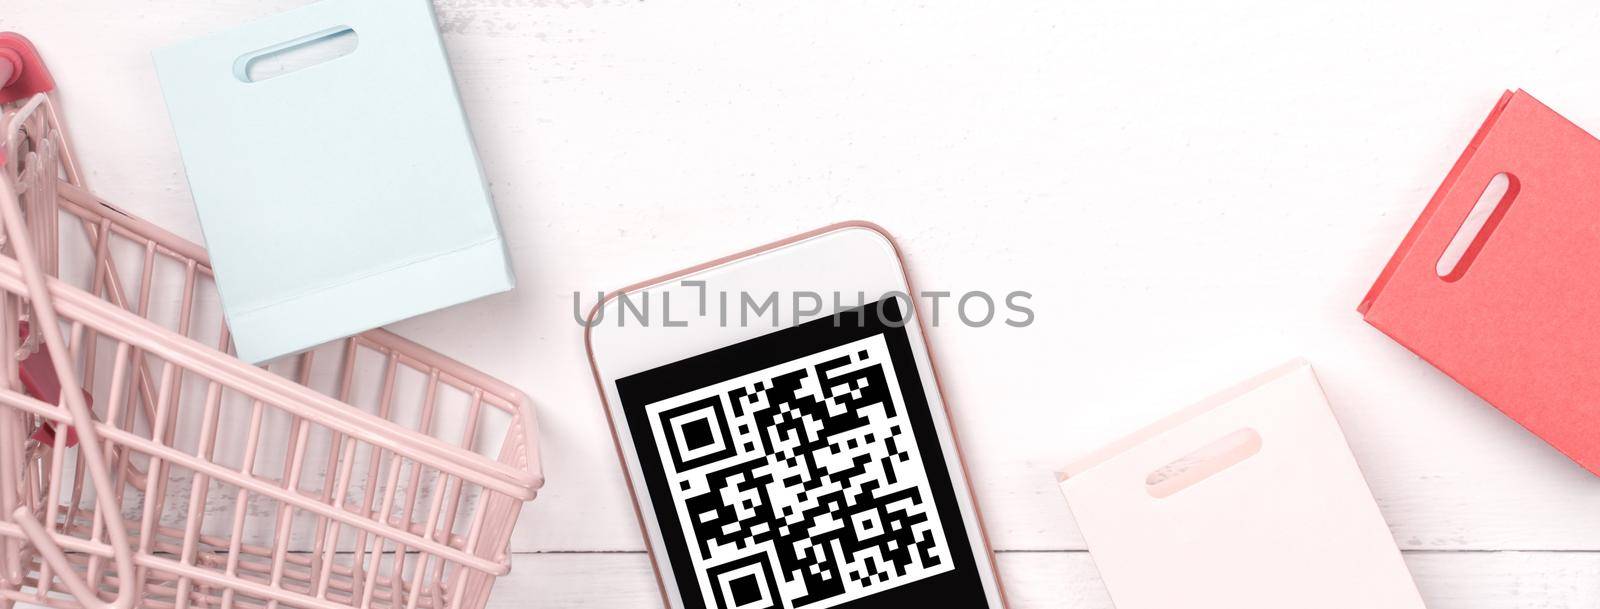 Abstract online shopping, mobile payment with QR code design concept element, colorful cart, paper bag on wooden table background, top view, flat lay